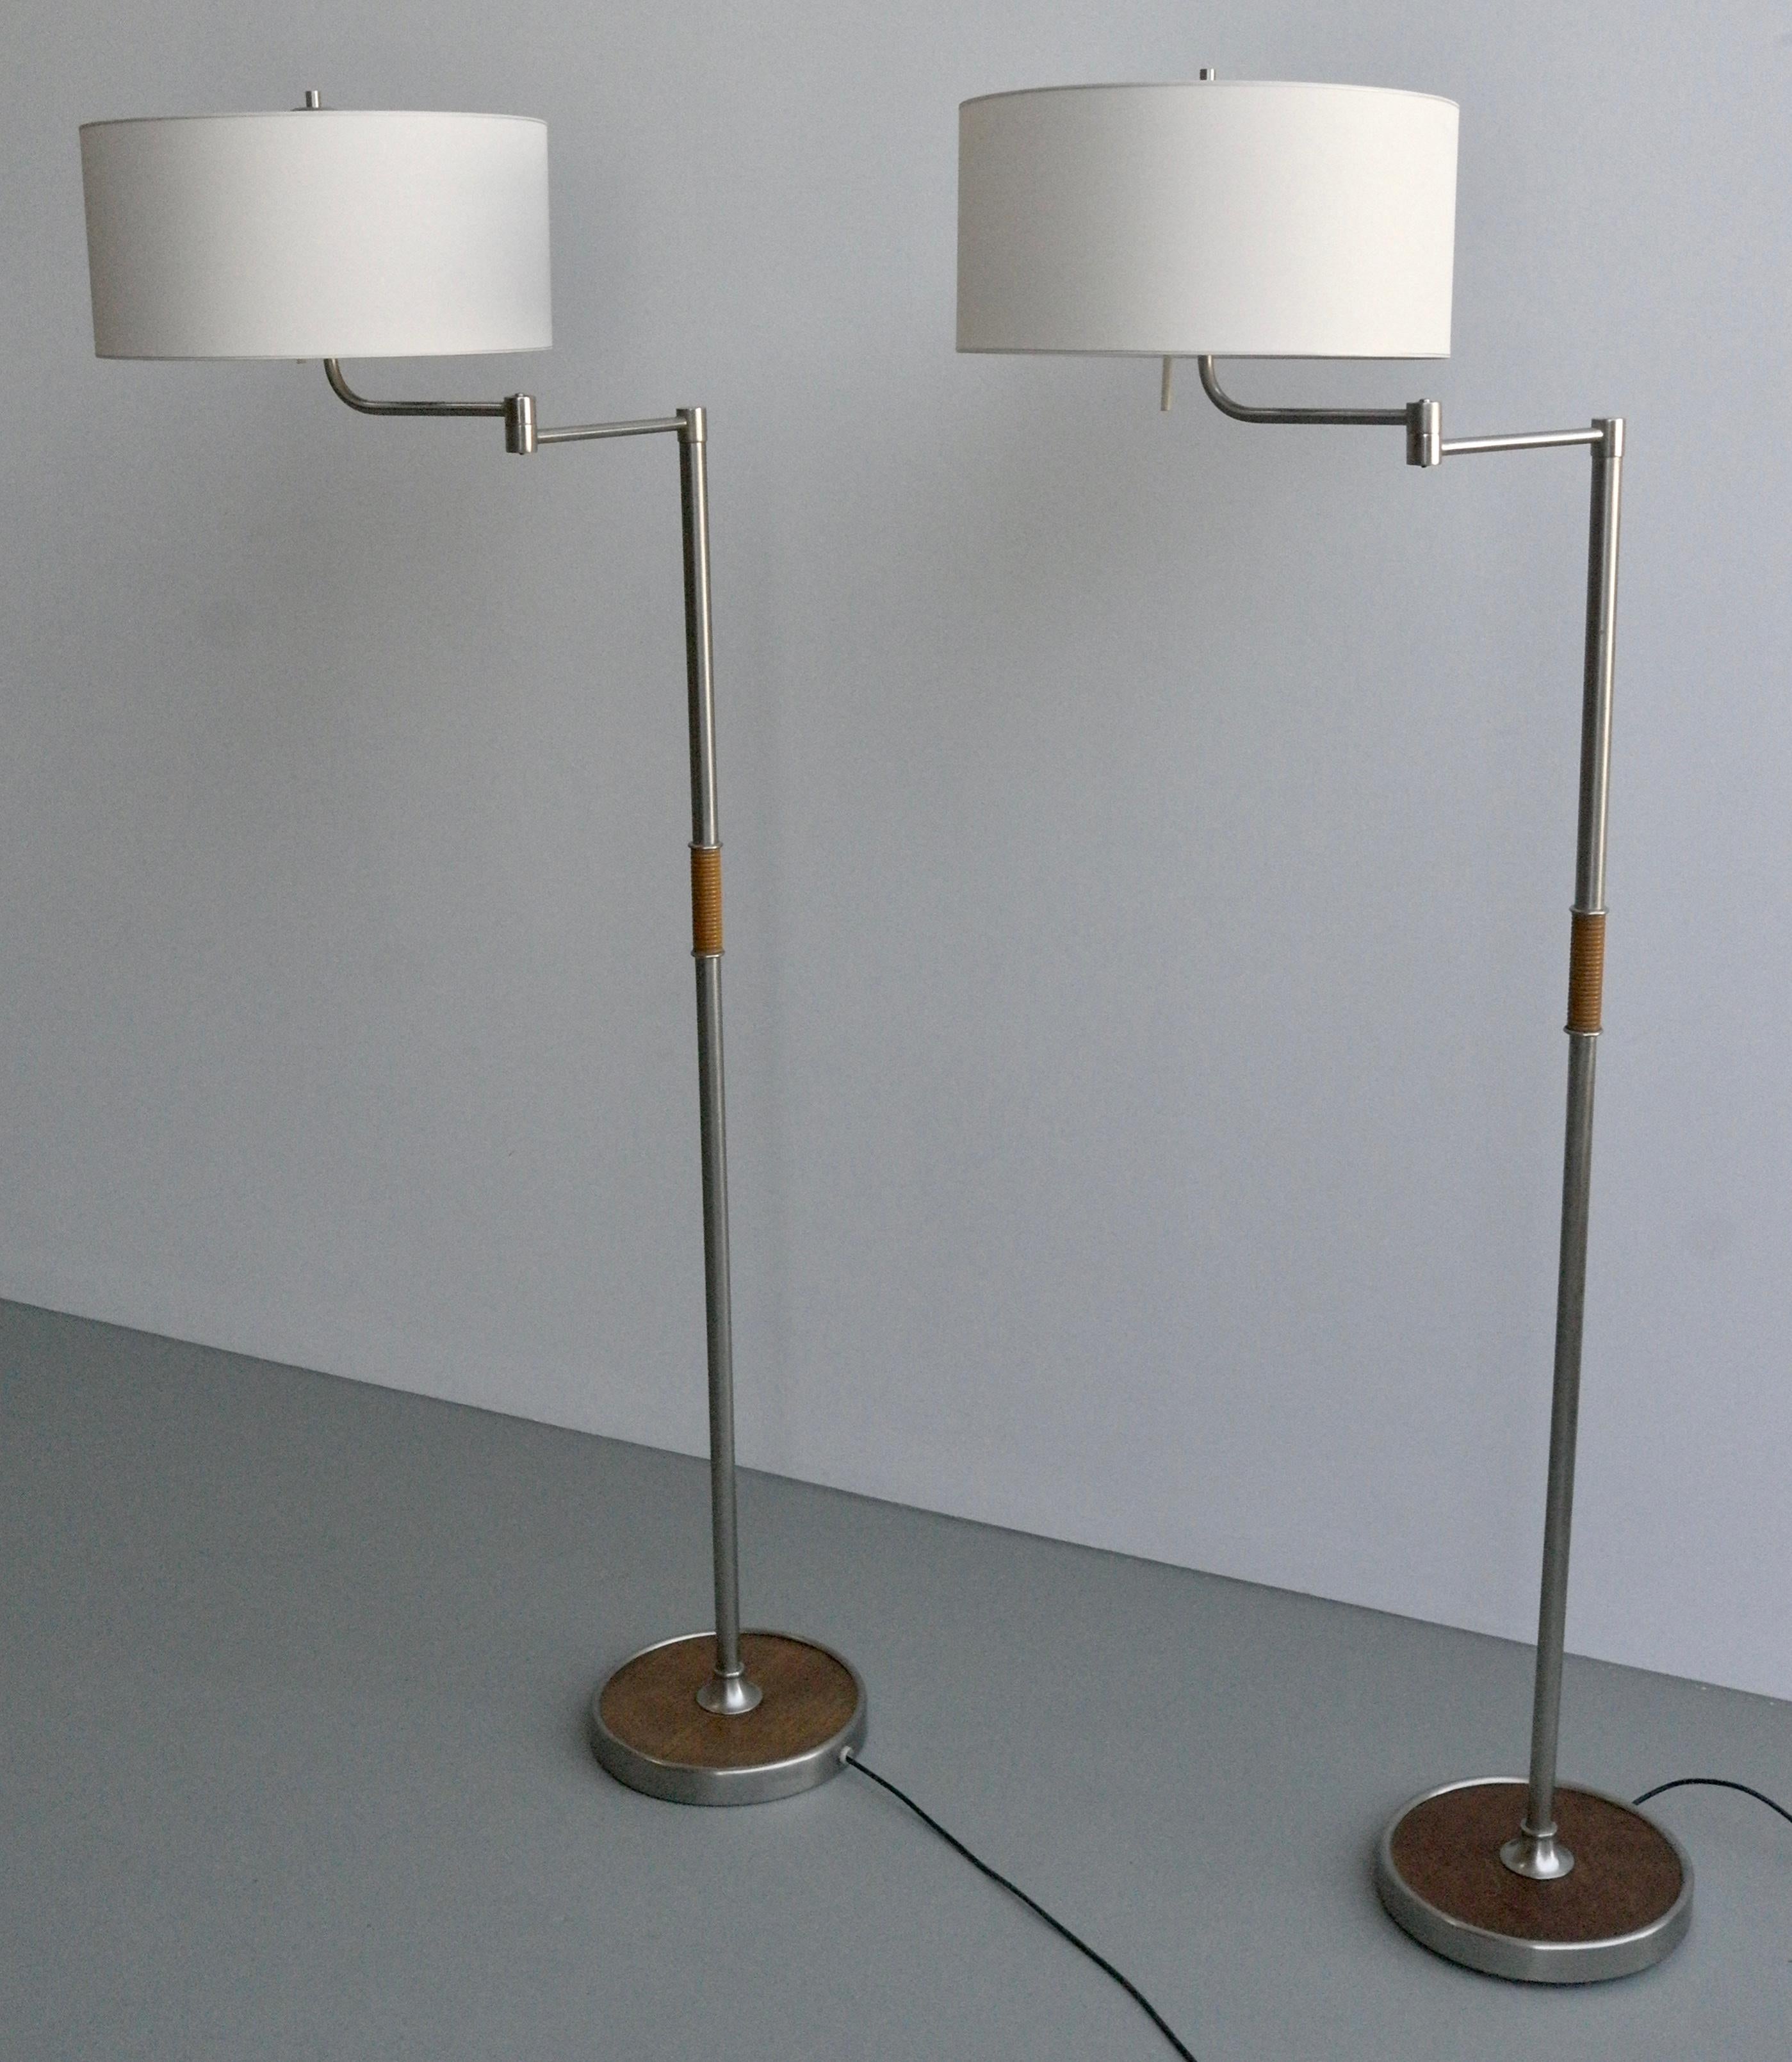 European Pair of Midcentury Swing-Arm Floor Lamps in Metal with Faux Bamboo Wood Details For Sale